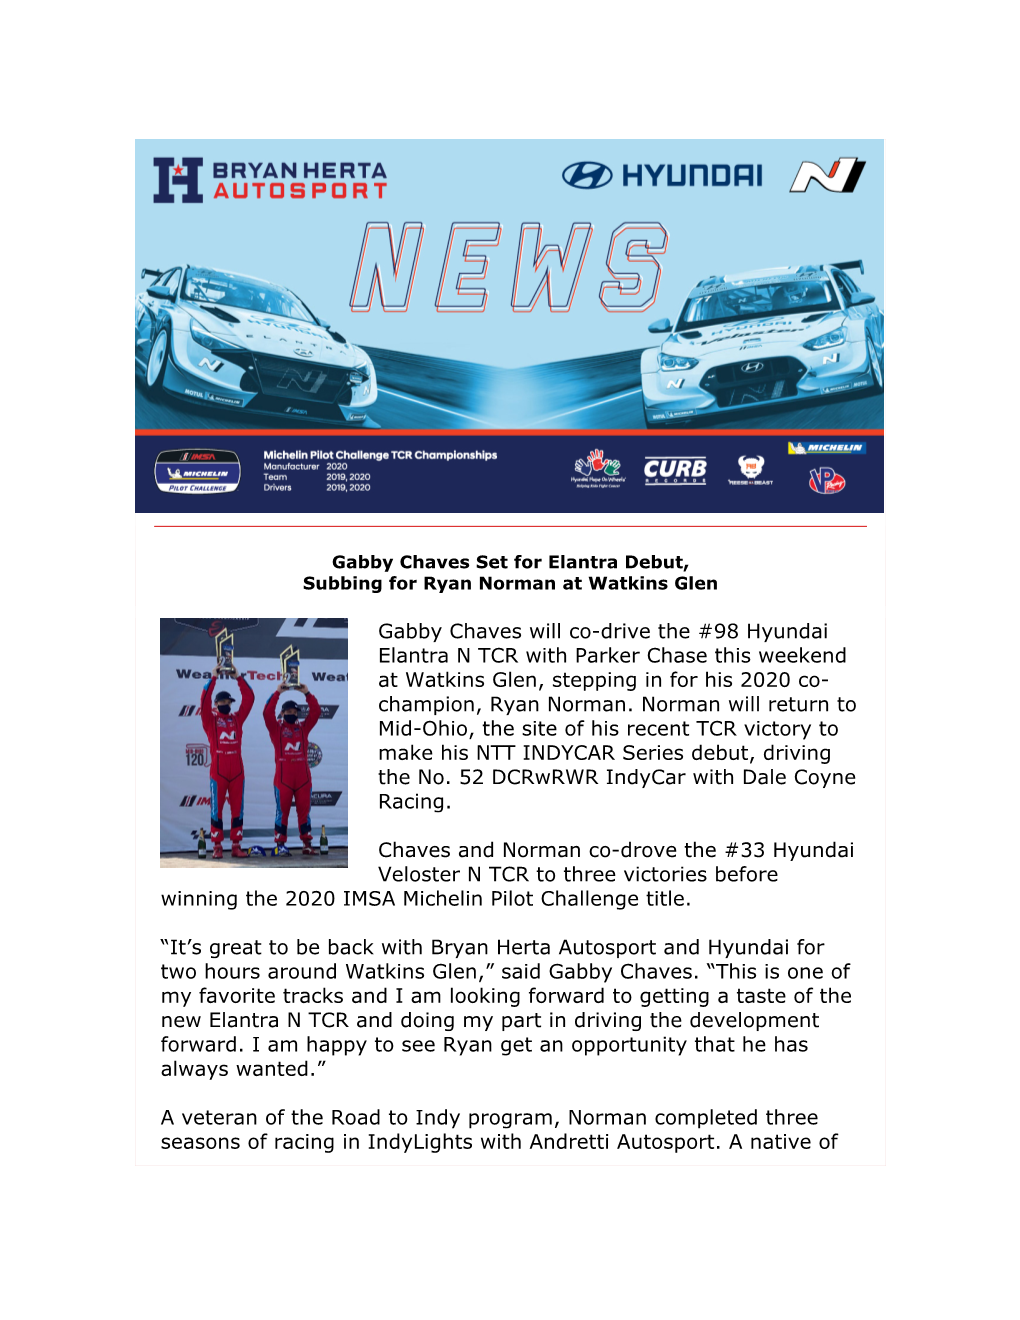 Gabby Chaves Will Co-Drive the #98 Hyundai Elantra N TCR with Parker Chase This Weekend at Watkins Glen, Stepping in for His 2020 Co- Champion, Ryan Norman